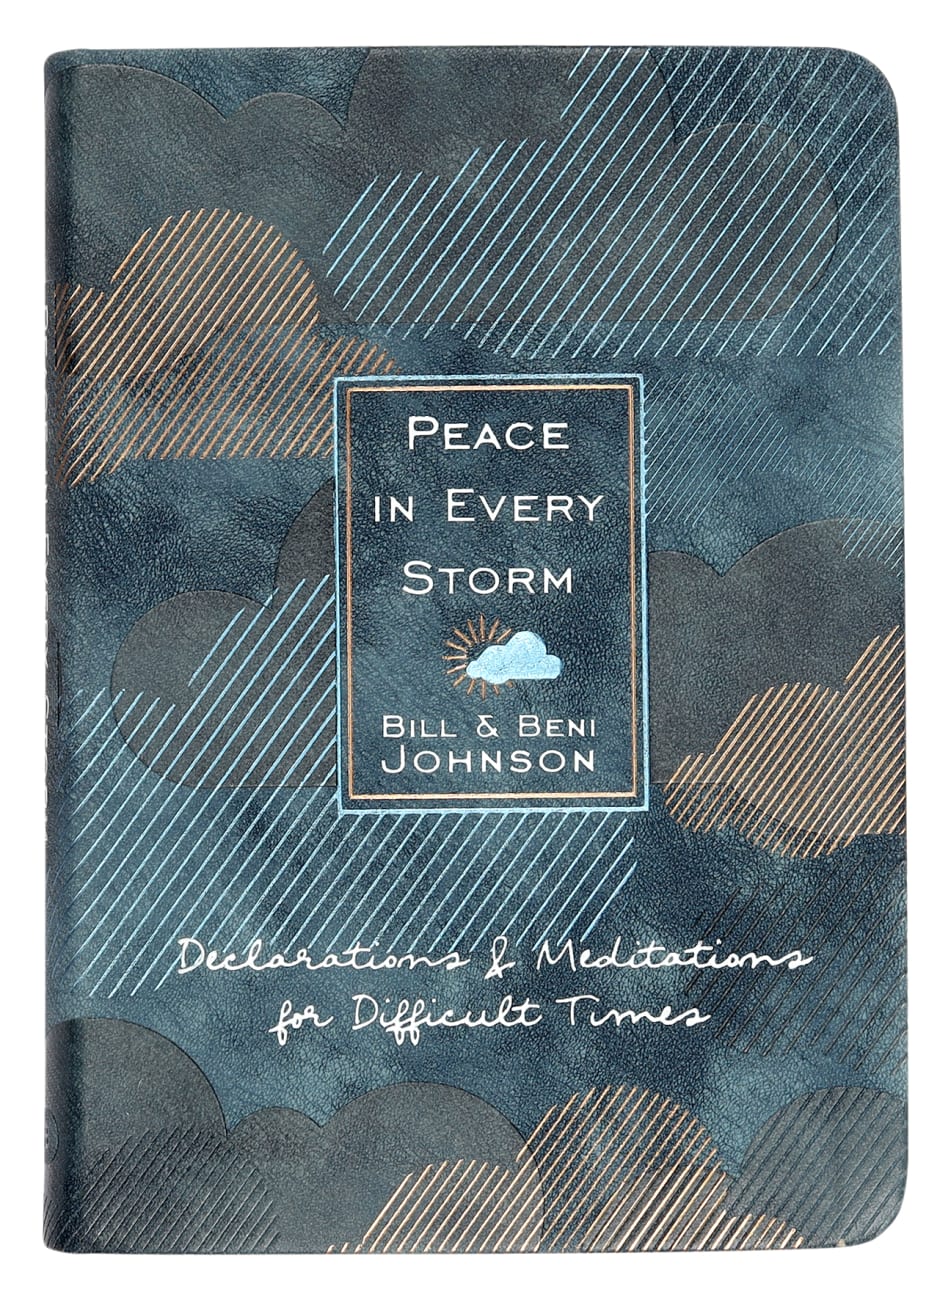 Peace in Every Storm: 52 Declarations & Meditations For Difficult Times Imitation Leather